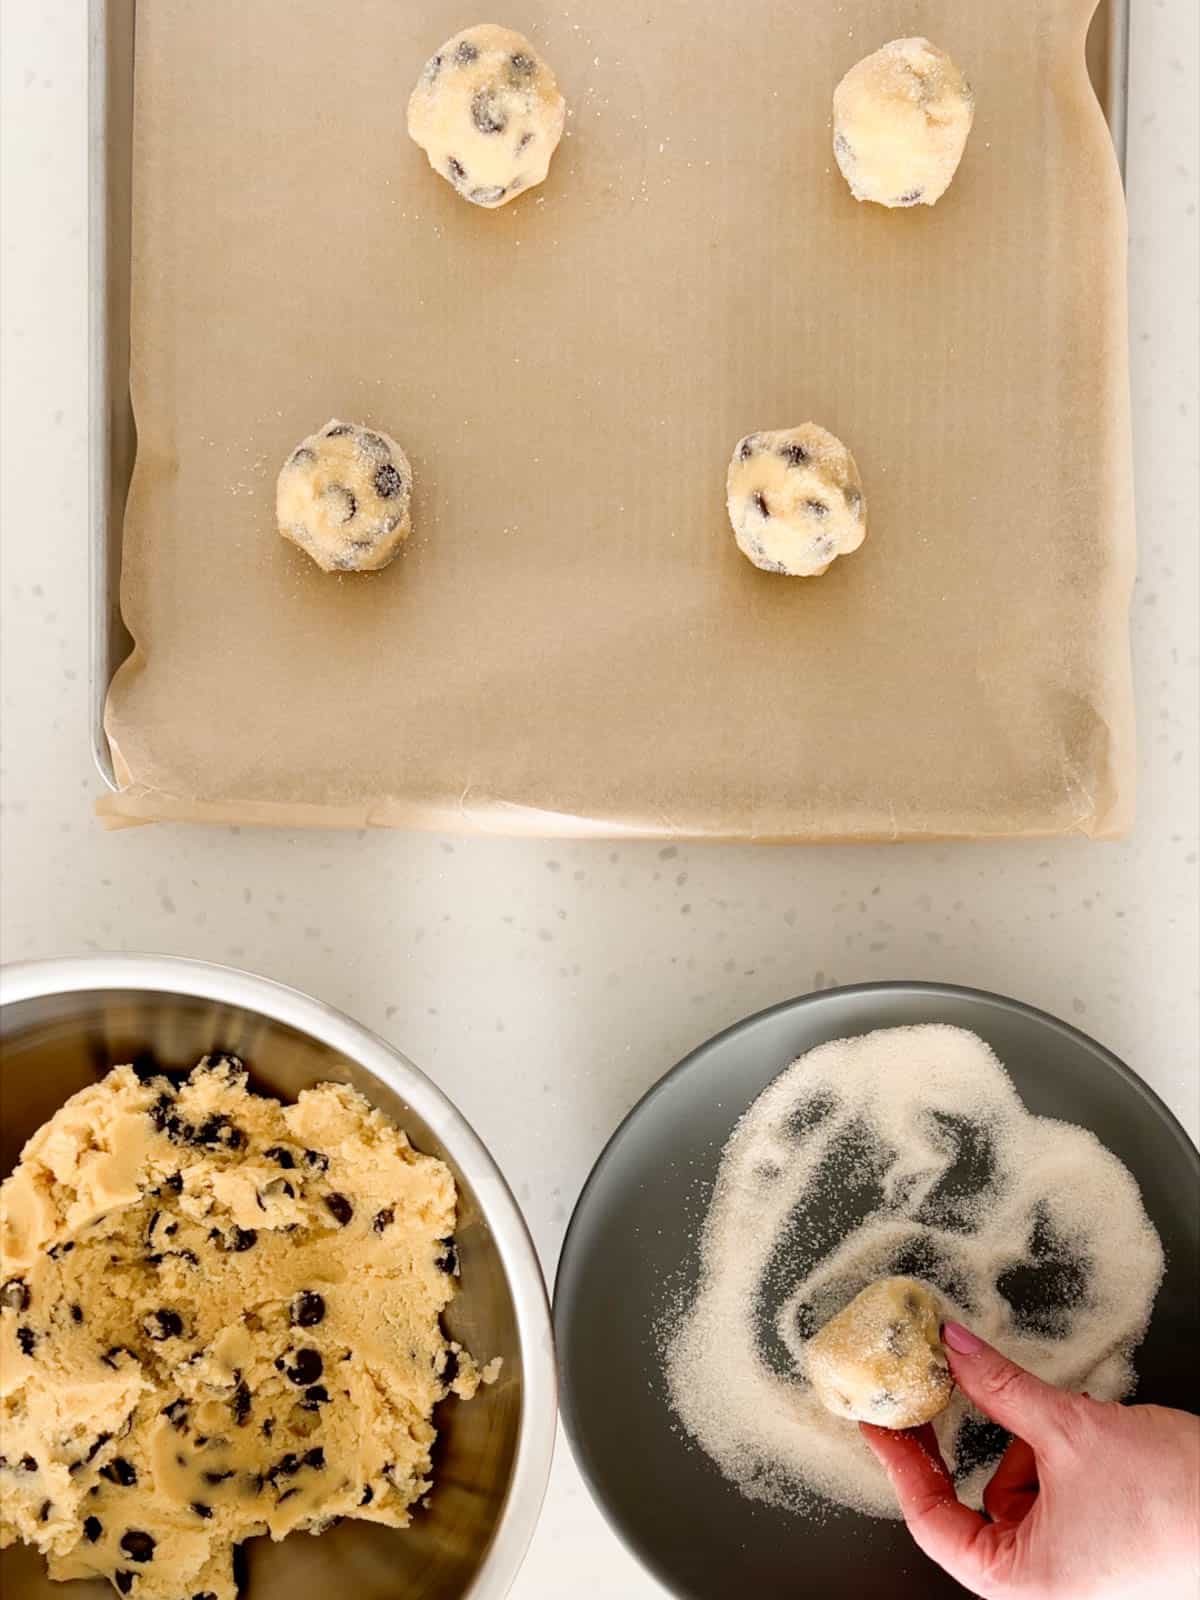 Balls of cookie dough are rolled in sugar and placed on a baking sheet.